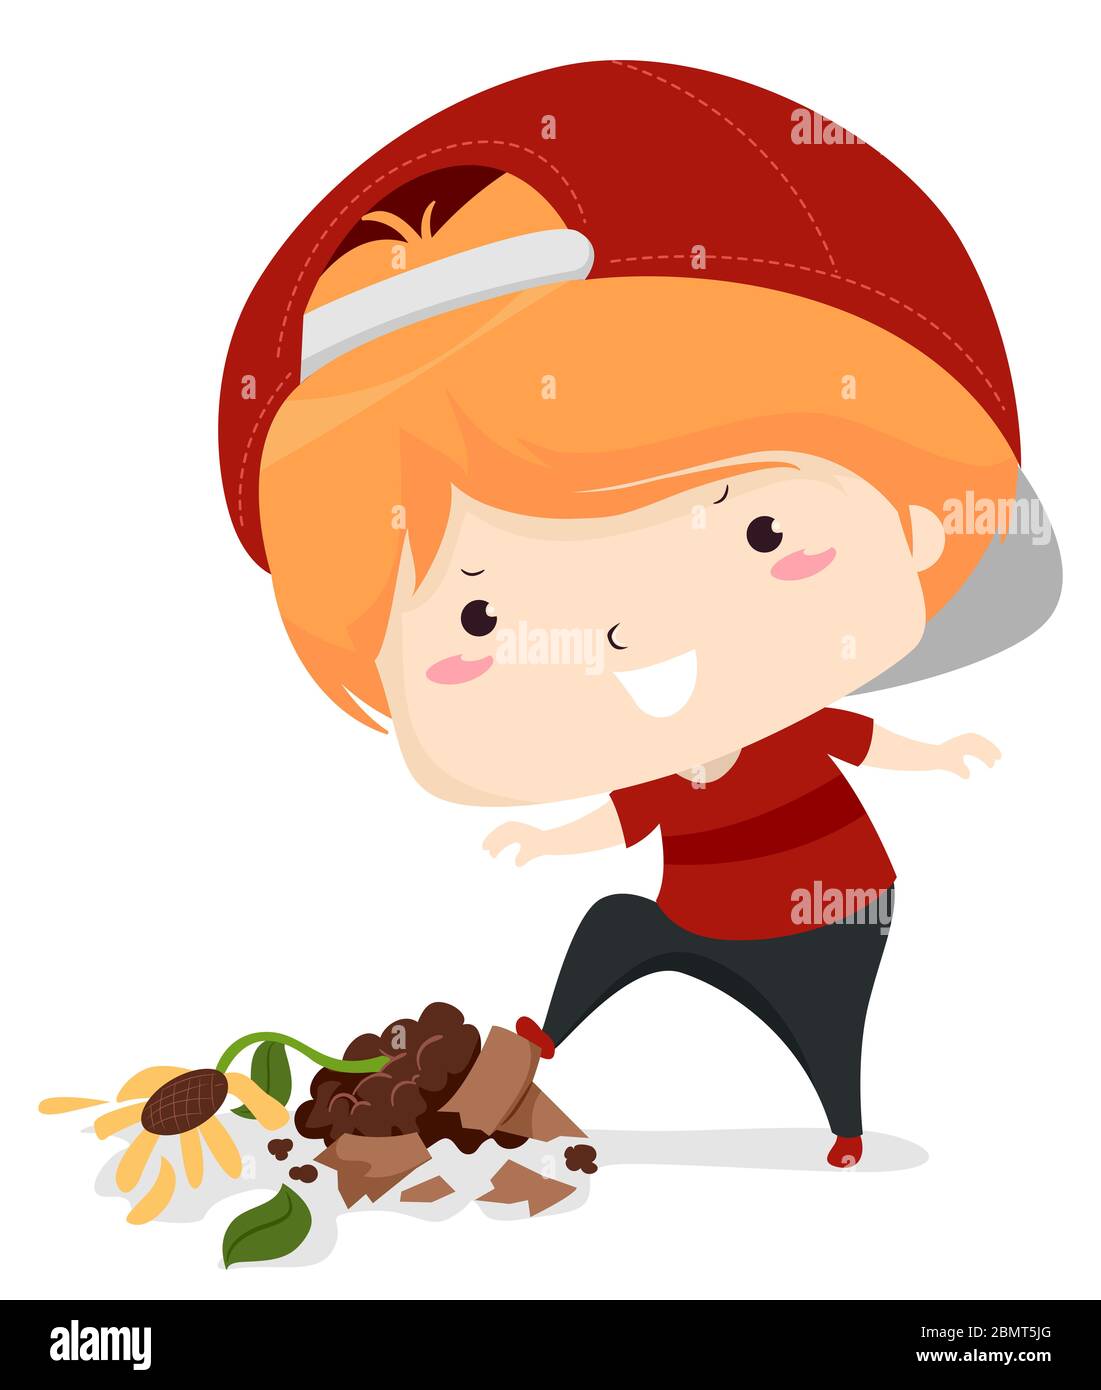 Illustration of a Kid Boy Doing Something Bad, Destroying a Potted Flower Plant and Stomping On It Stock Photo